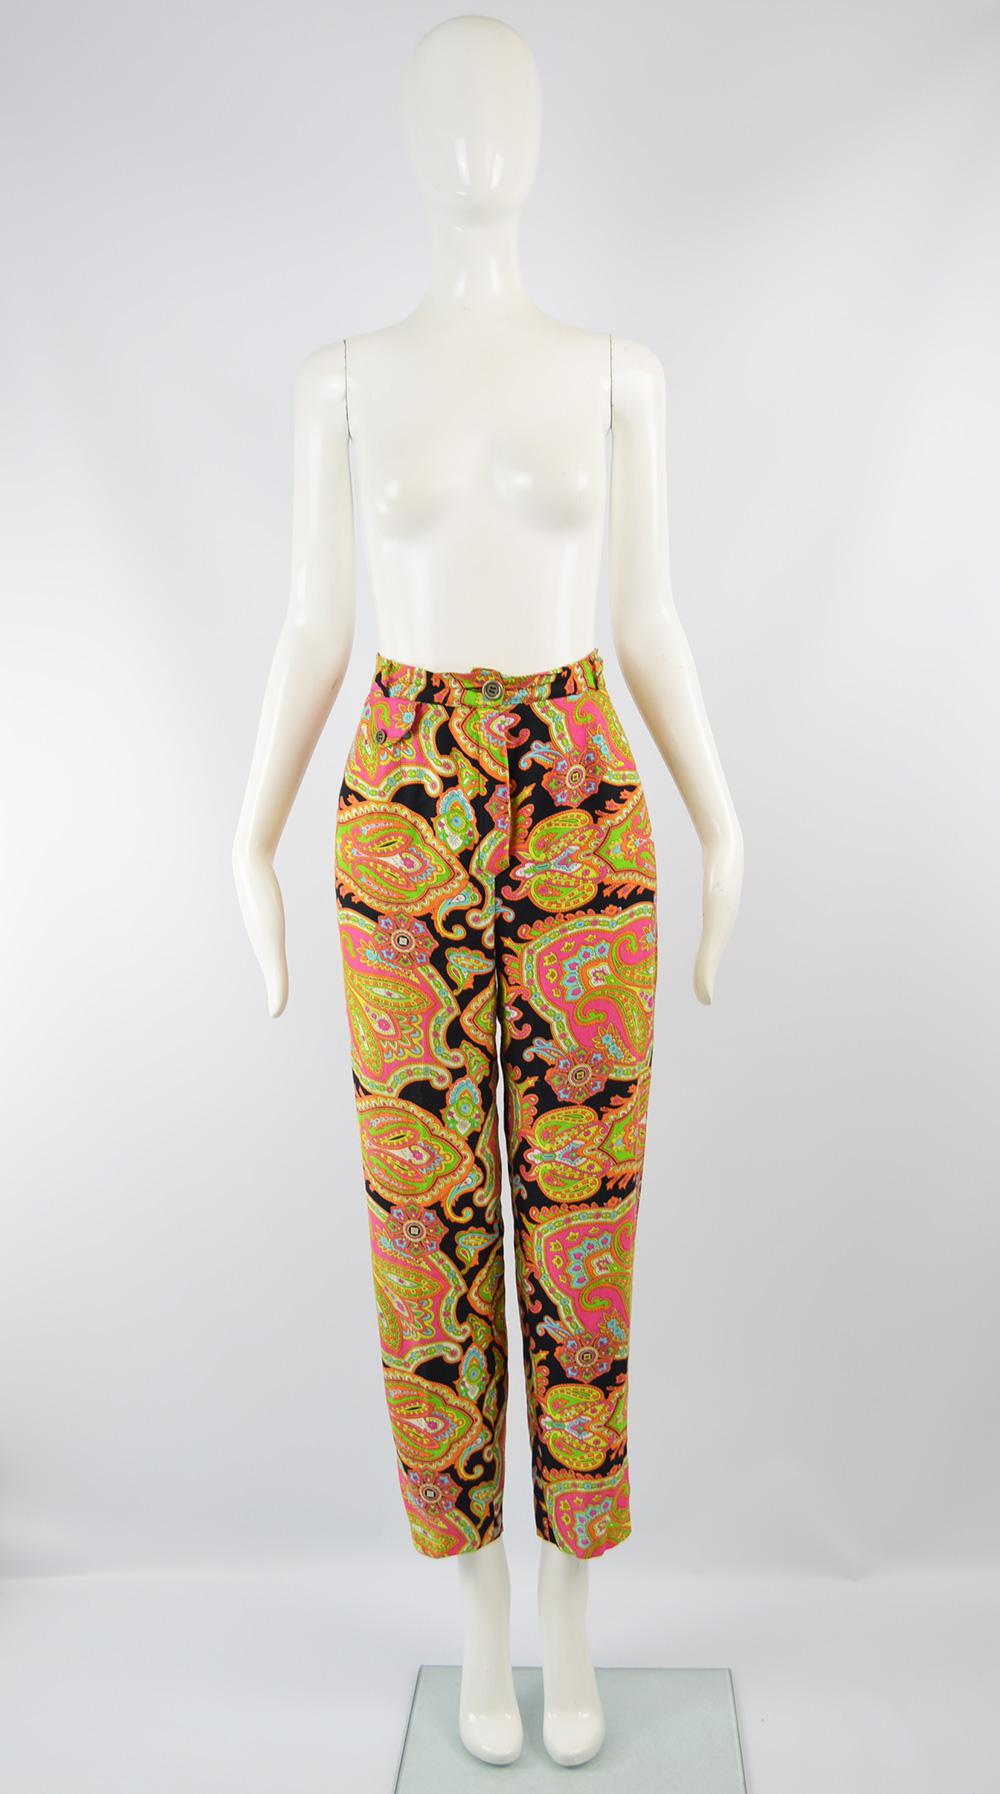 A beautiful pair of vintage women's high waist pants from the 90s by luxury fashion designer, Rifat Ozbek for his Future Ozbek line. In a fluid, drapey rayon (viscose) fabric with a bold, psychedelic paisley pattern on a black background.  With a